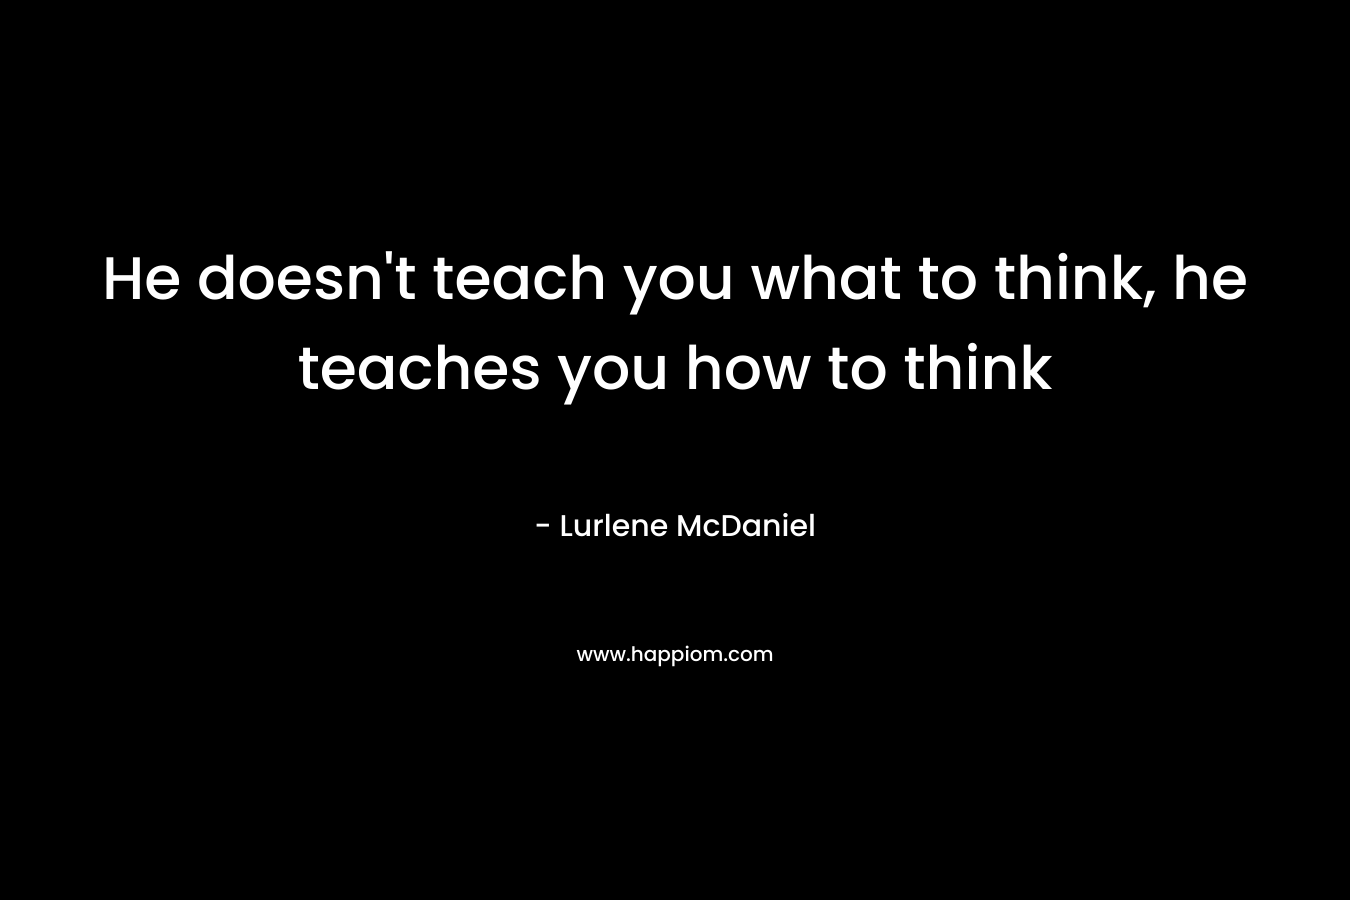 He doesn't teach you what to think, he teaches you how to think